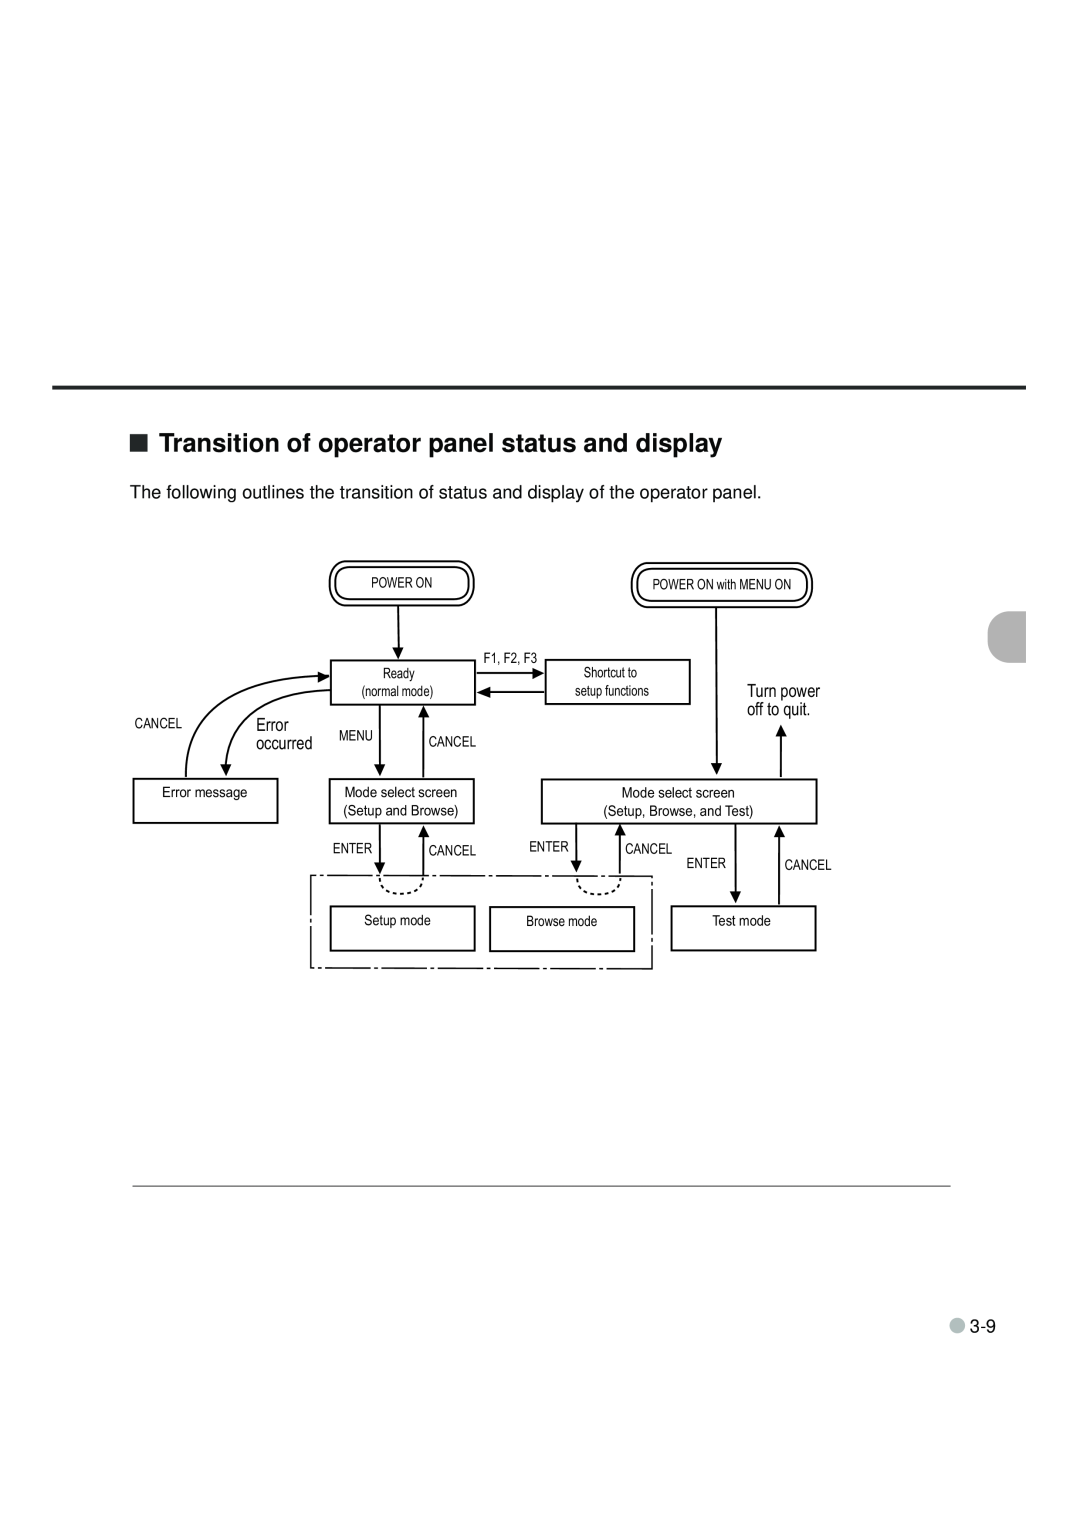 Fujitsu fi-4990C manual Transition of operator panel status and display, occurred, off to quit 